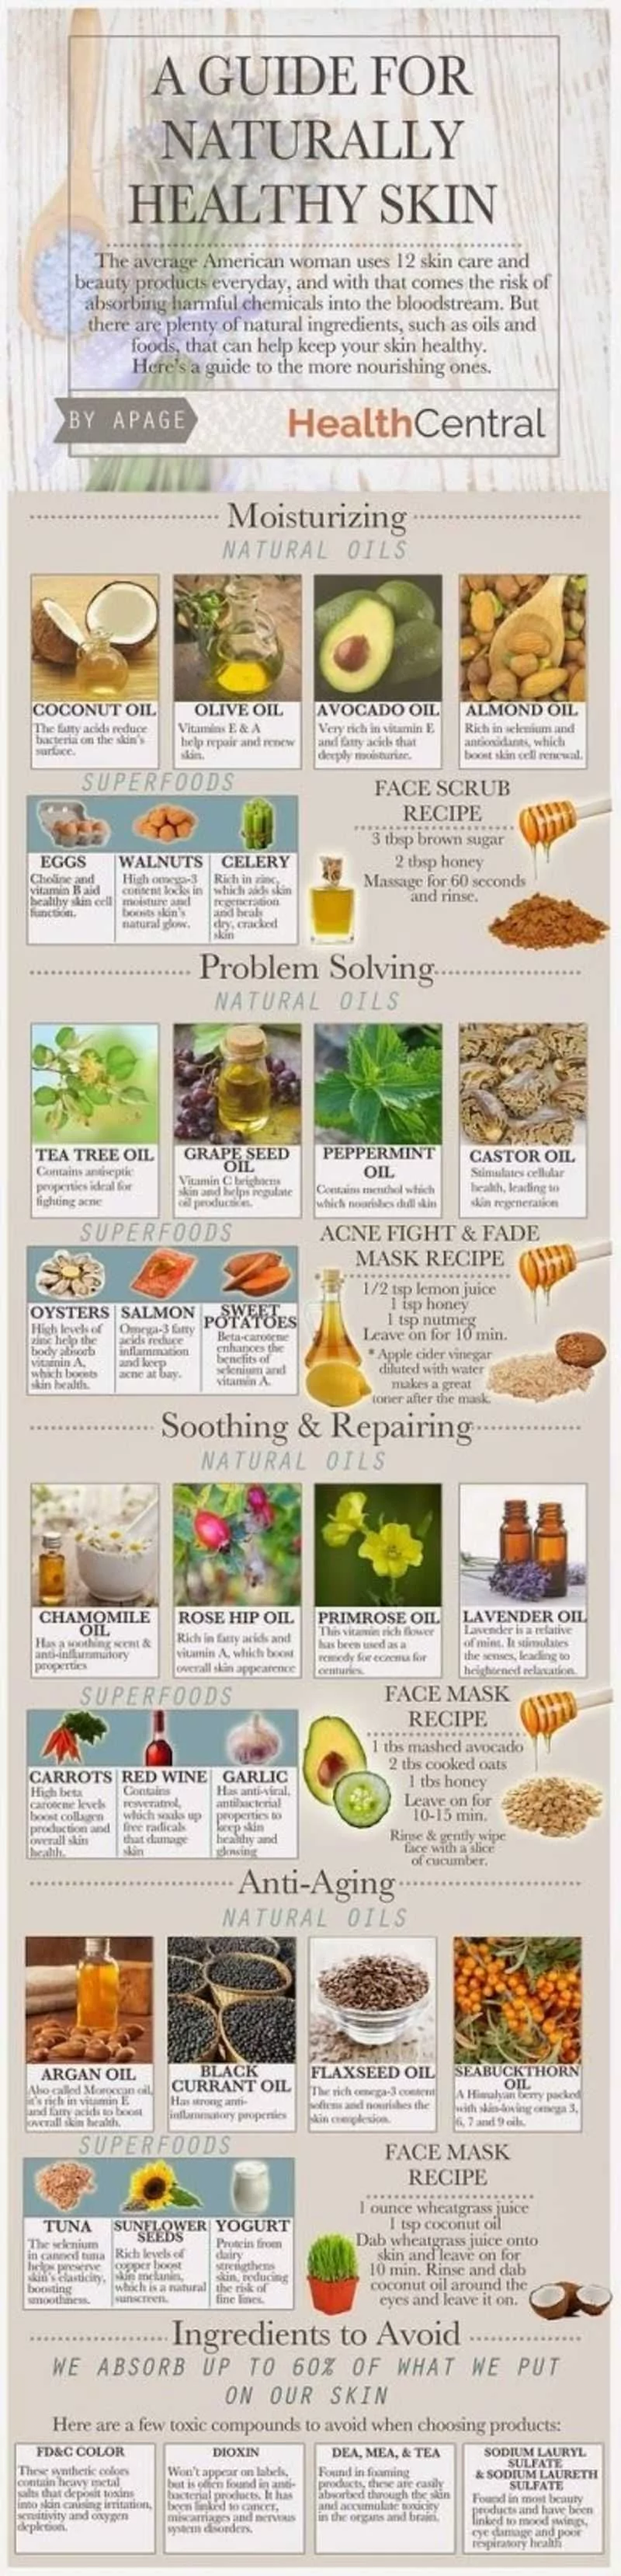 A Guide For Naturally Healthy Skin